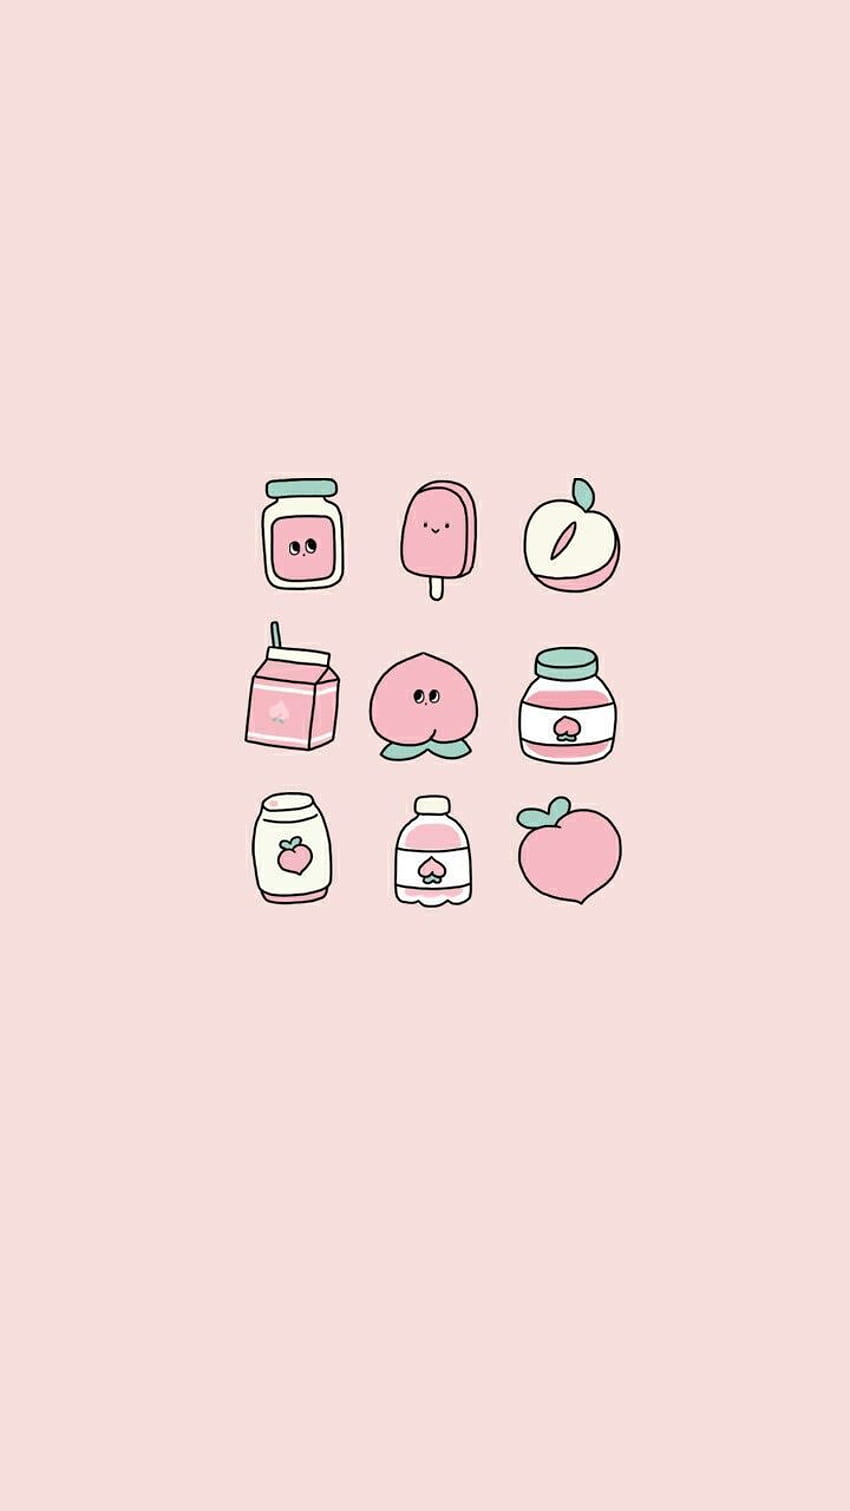 Aesthetic phone background with pink and blue drawings of jam, ice cream, peach, apple, and a bottle - Kawaii, pretty, food, cute, phone, pastel